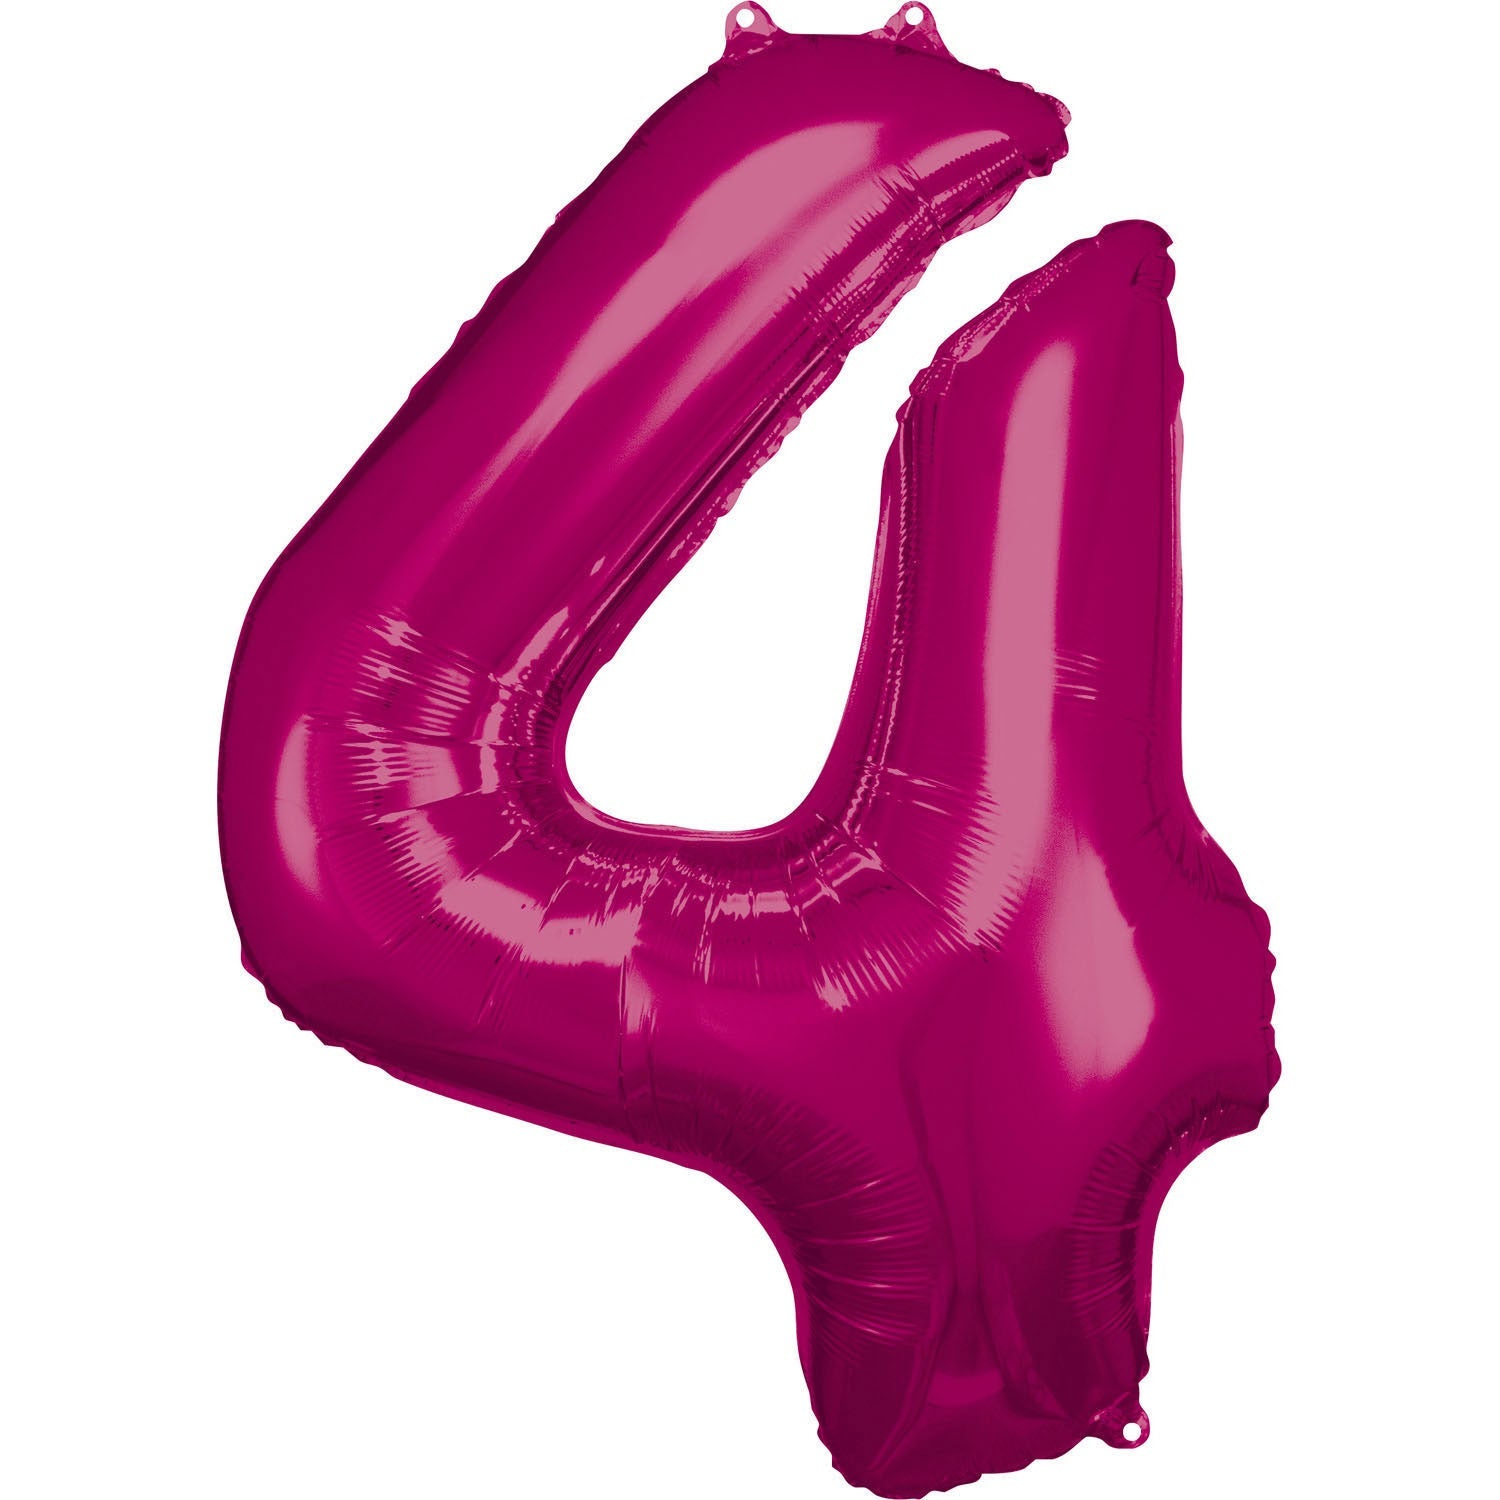 Pink Supershape Number 4 Foil Balloon 88cm (34in) height by 66cm (25in) width Balloon is sold uninflated. Can be inflated with air or helium.